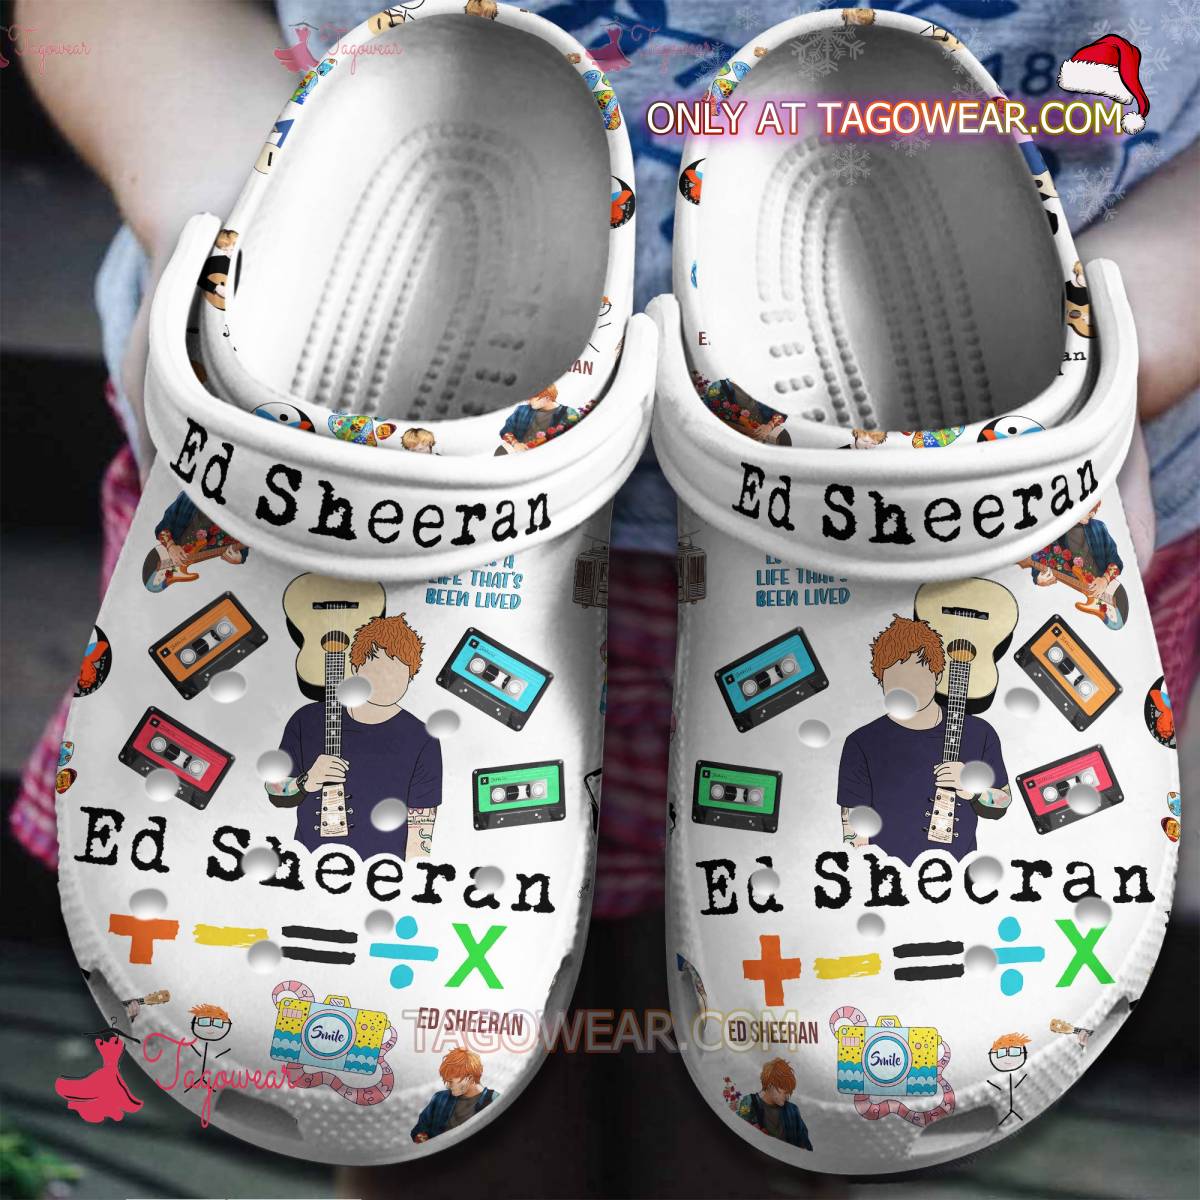 Ed Sheeran A Life With Love Is A Life That's Been Lived Crocs